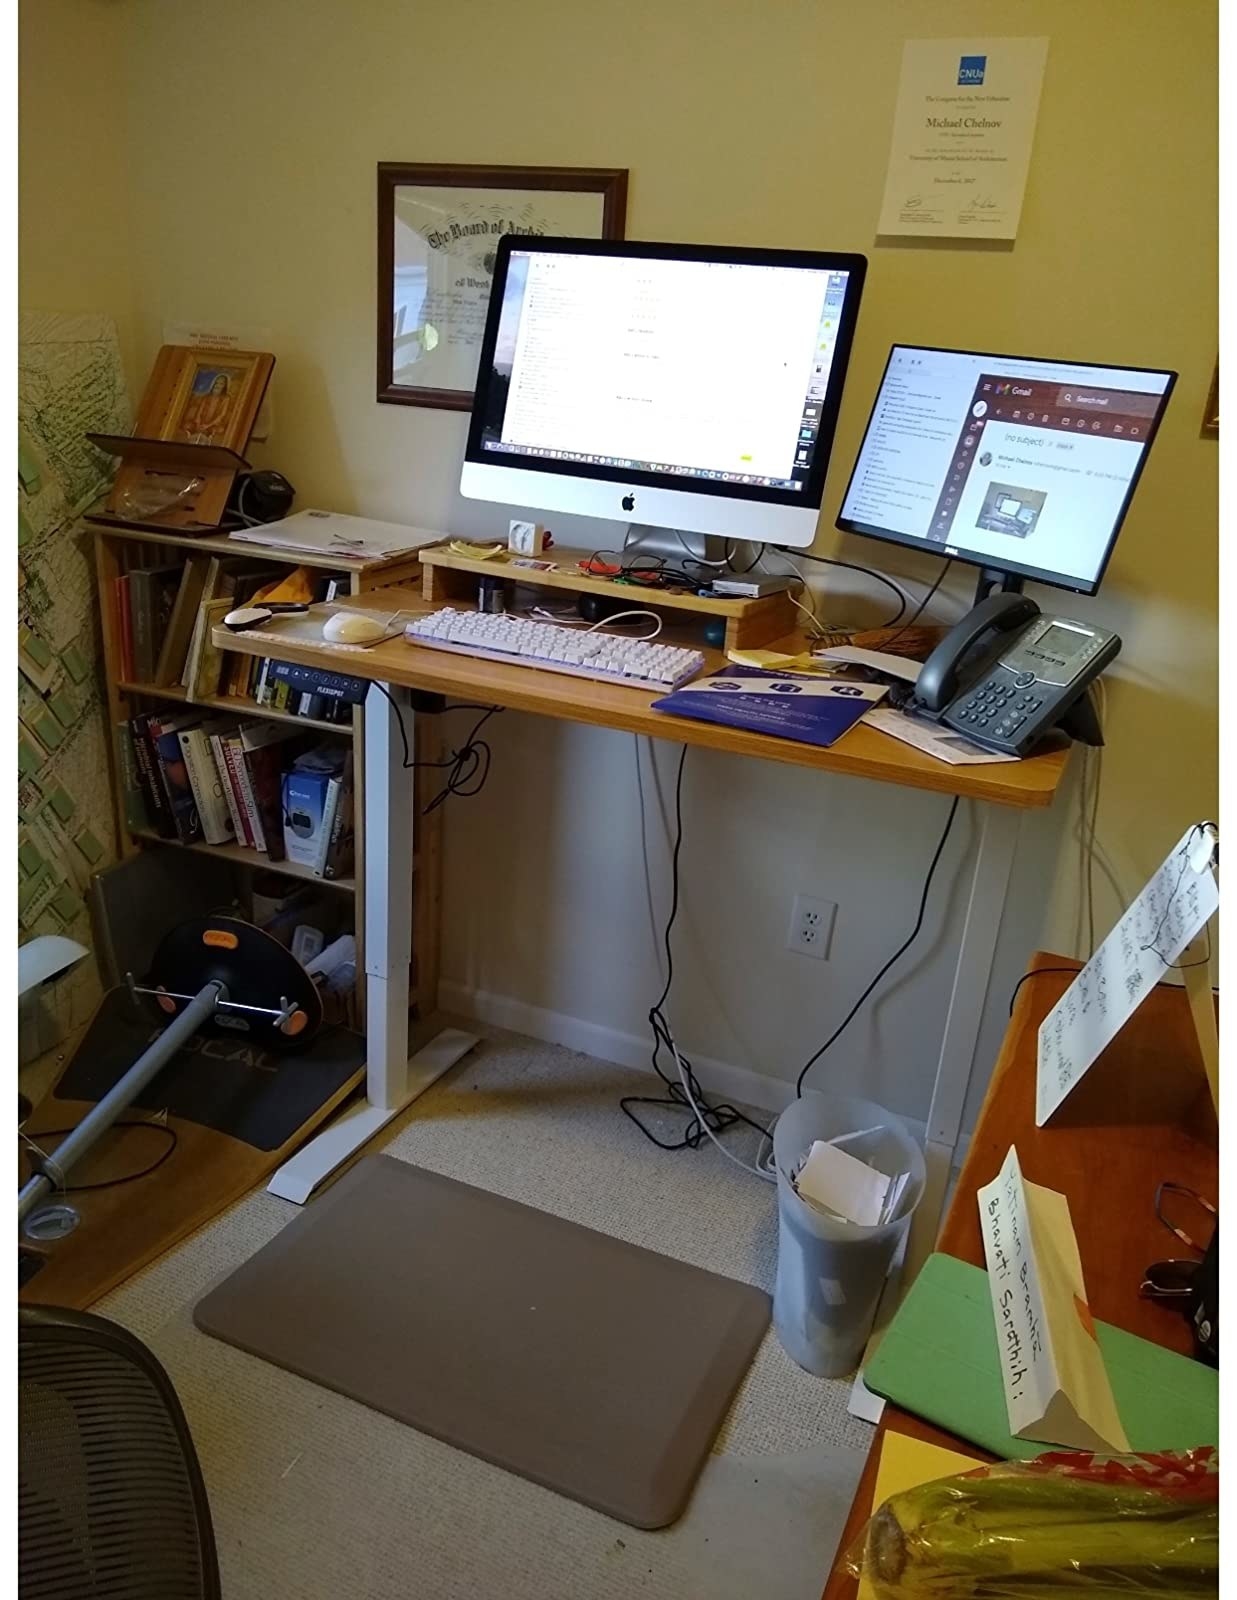 7 Best Standing Desk Mats in 2023 - Remote Bliss